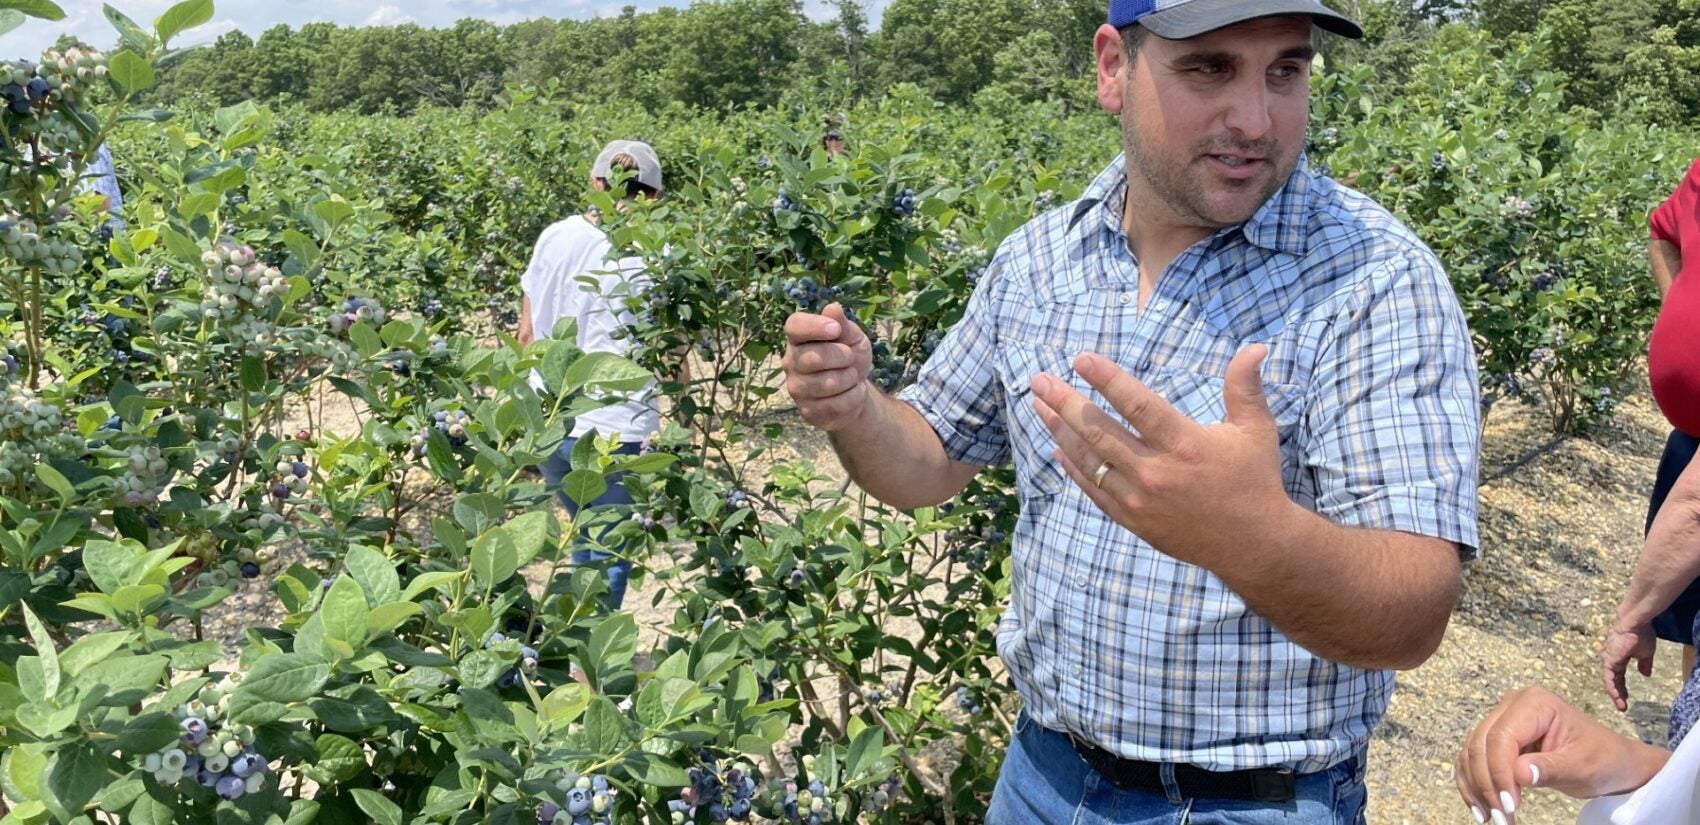 Matthew Macrie, the general manager of Macrie Brothers Blueberry Farm in Hammonton. (David Matthau/WHYY)